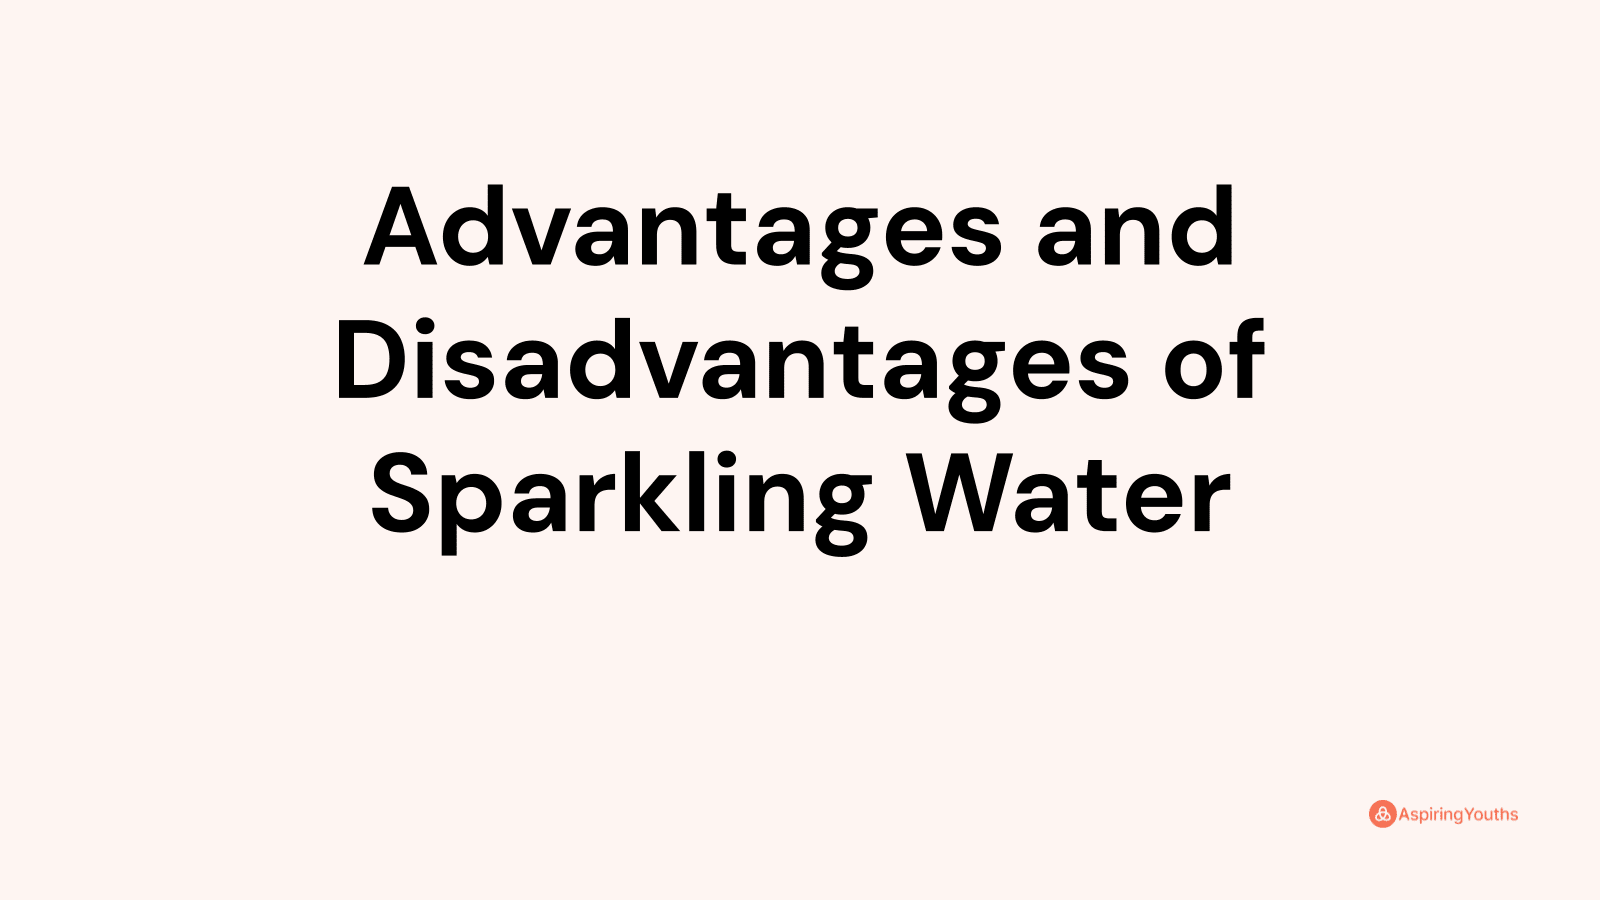 Advantages and disadvantages of Sparkling Water